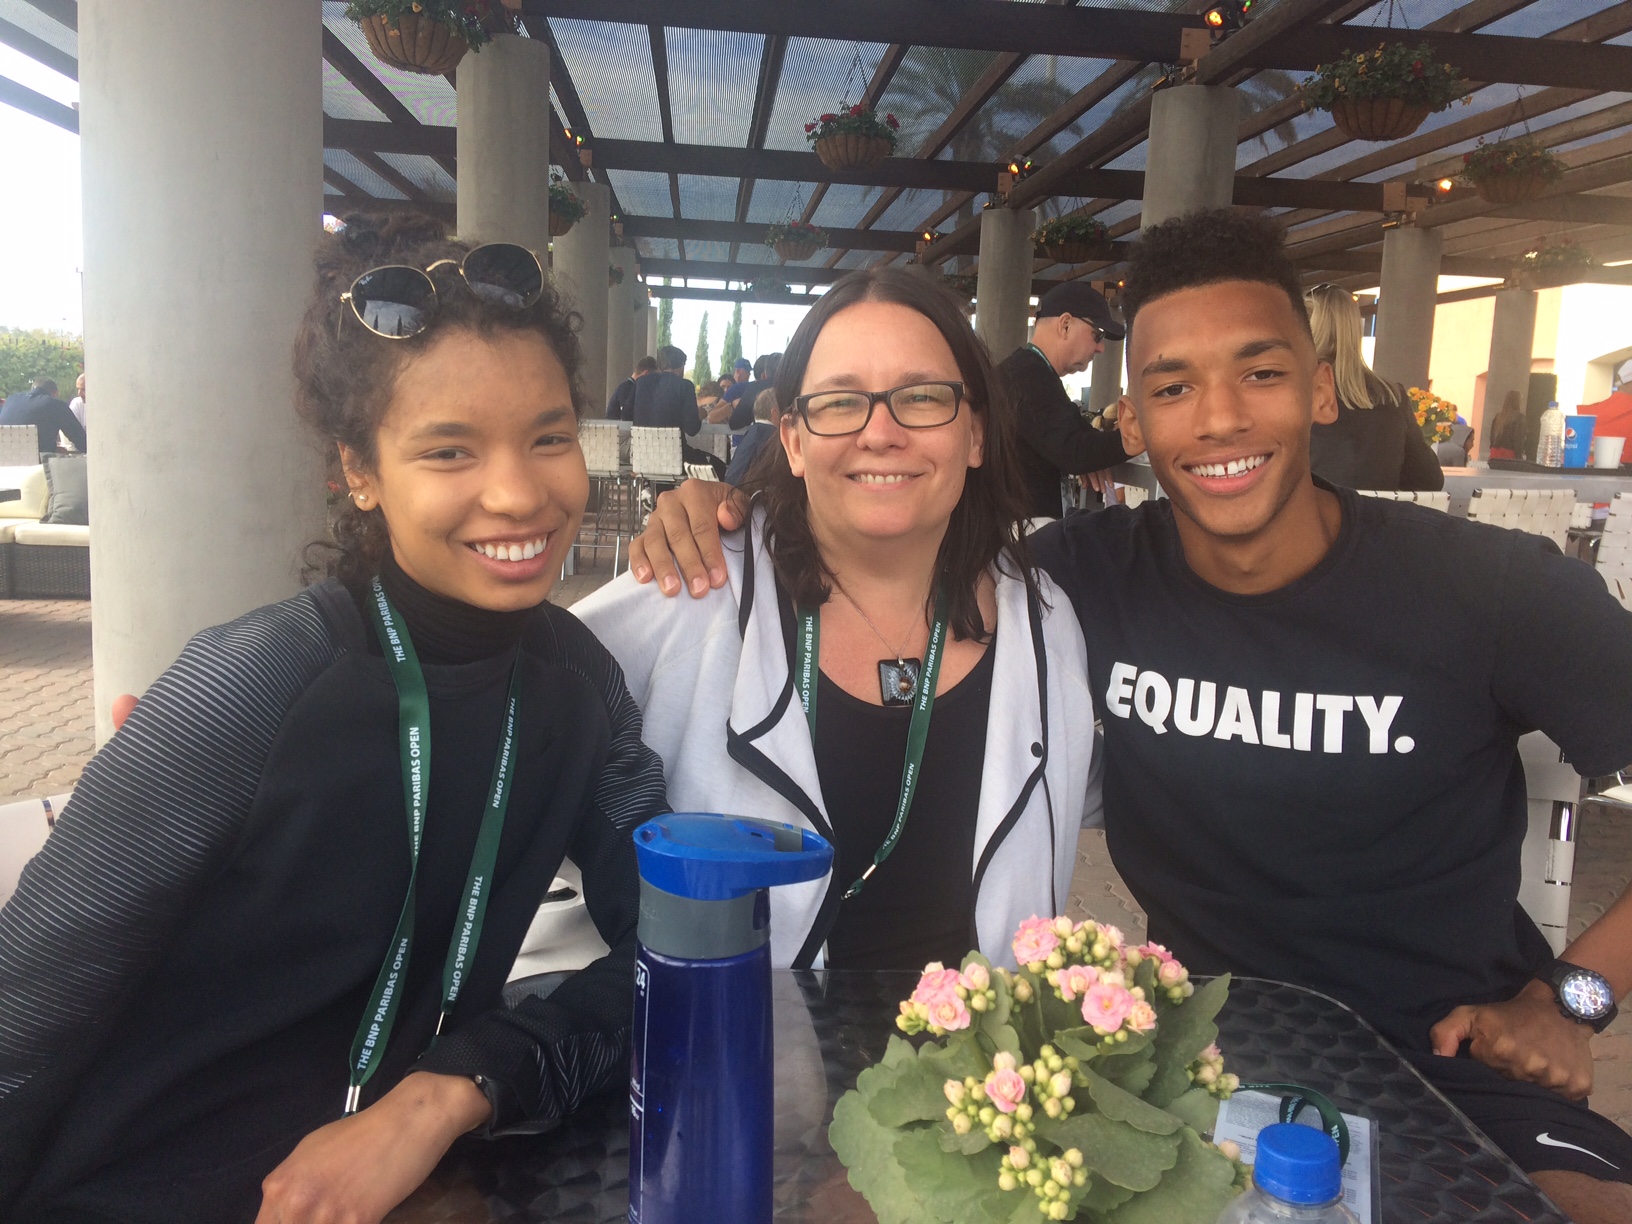 Family First with the Auger-Aliassime Clan